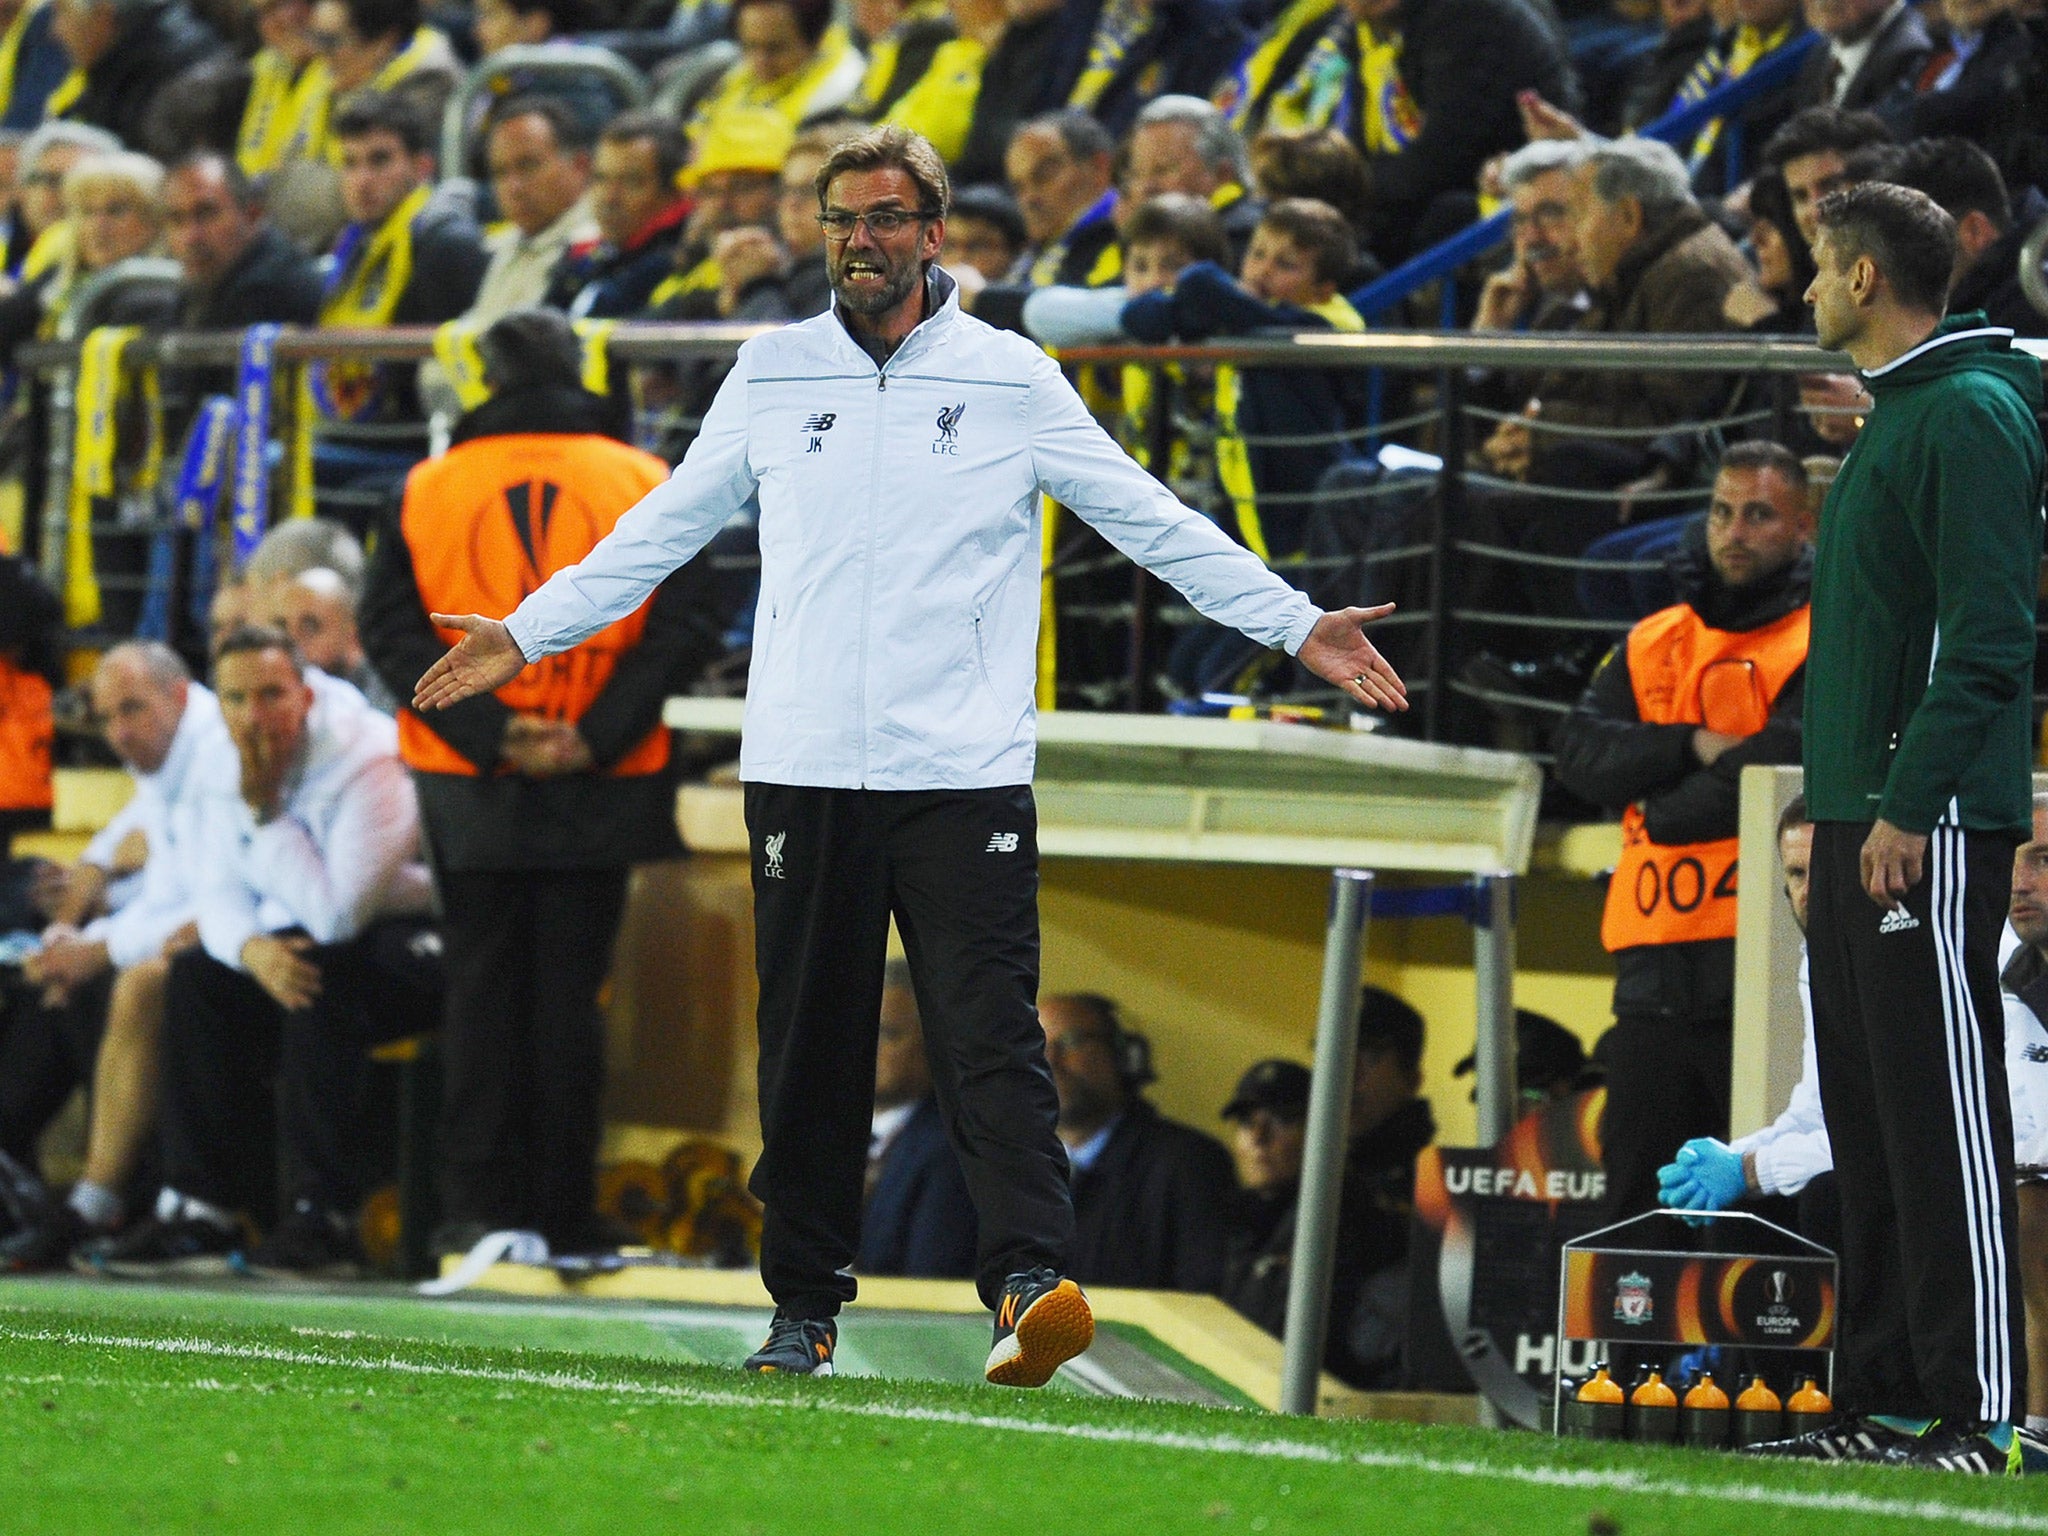 Jurgen Klopp reacts on the sidelines during Liverpool's 1-0 defeat by Villarreal